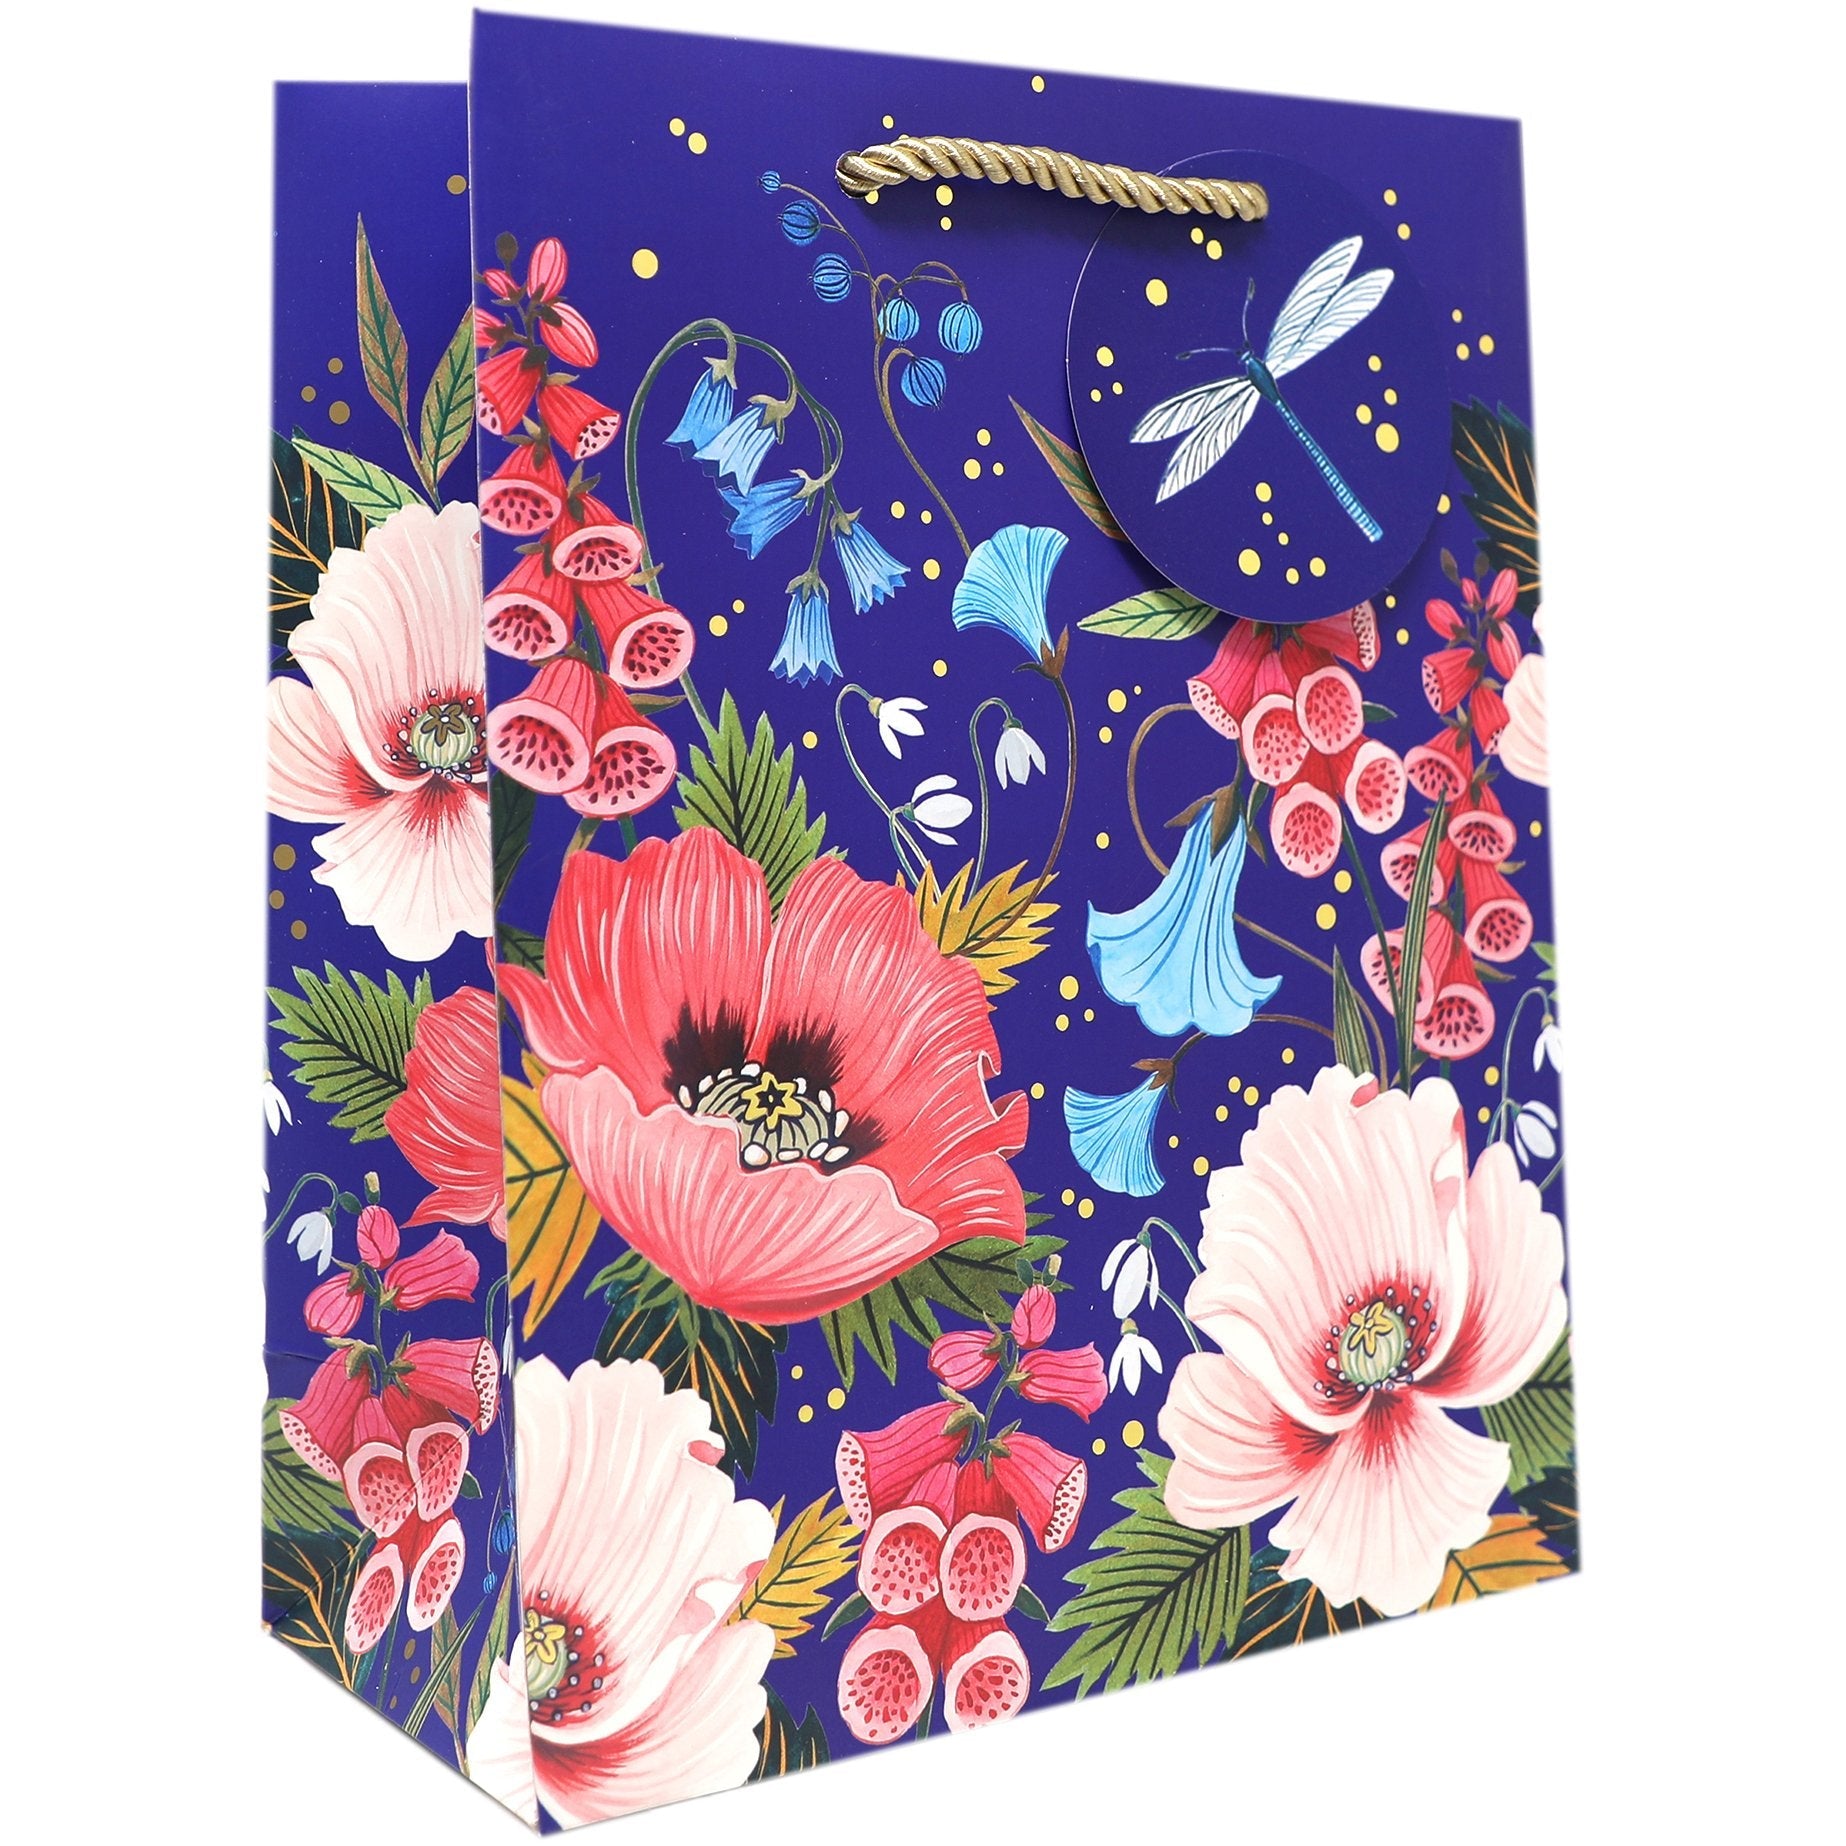 Large Floral Gift Bags, Blooming with Foil Accents